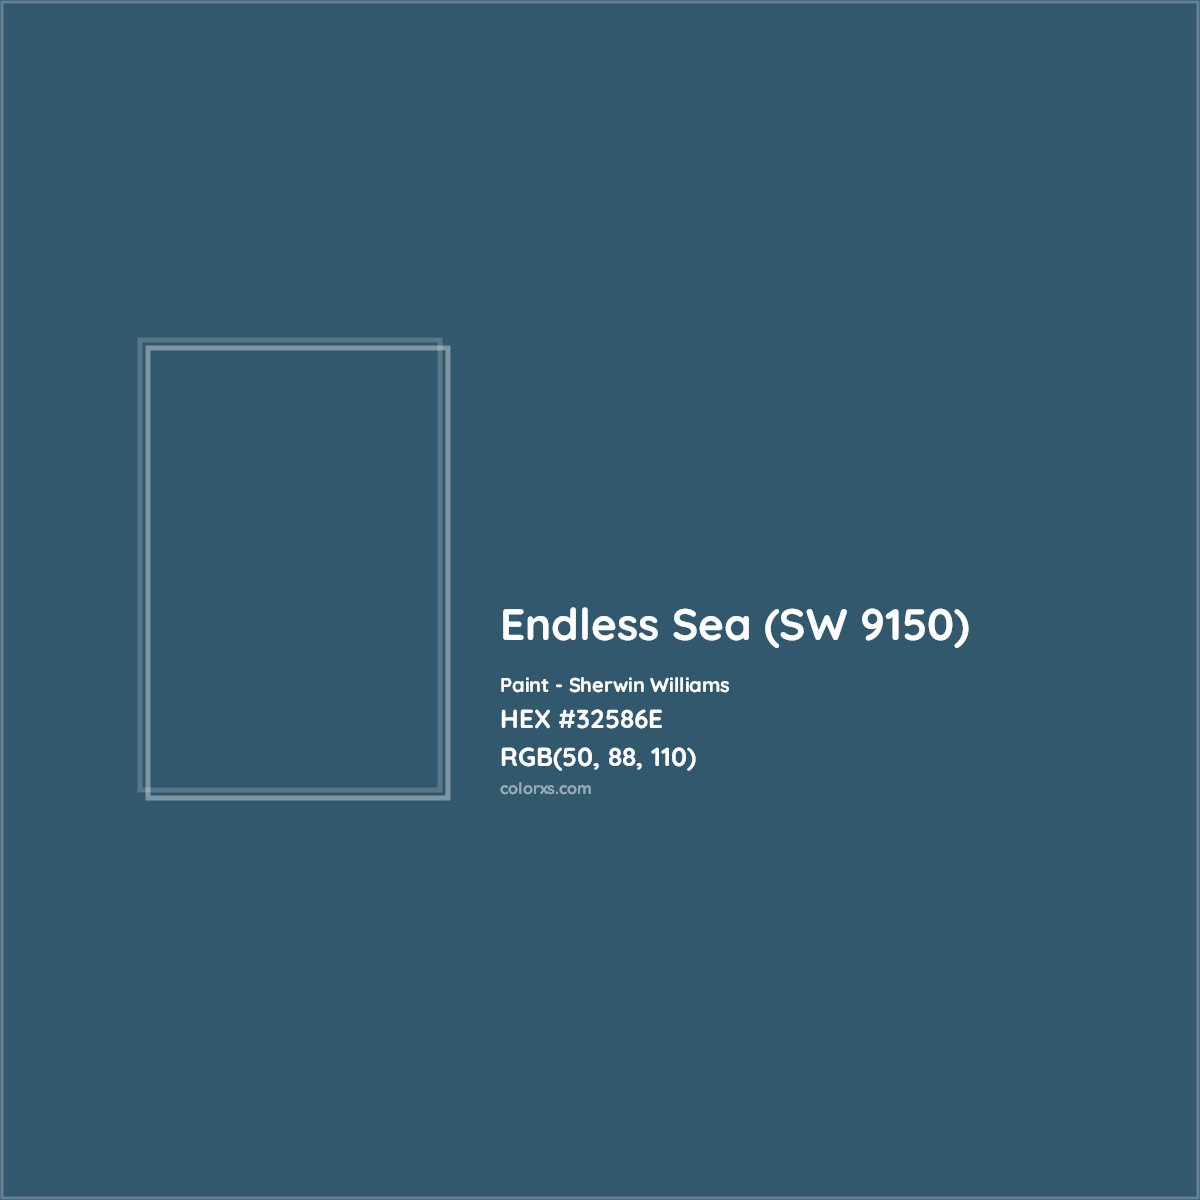 HEX #32586E Endless Sea (SW 9150) Paint Sherwin Williams - Color Code